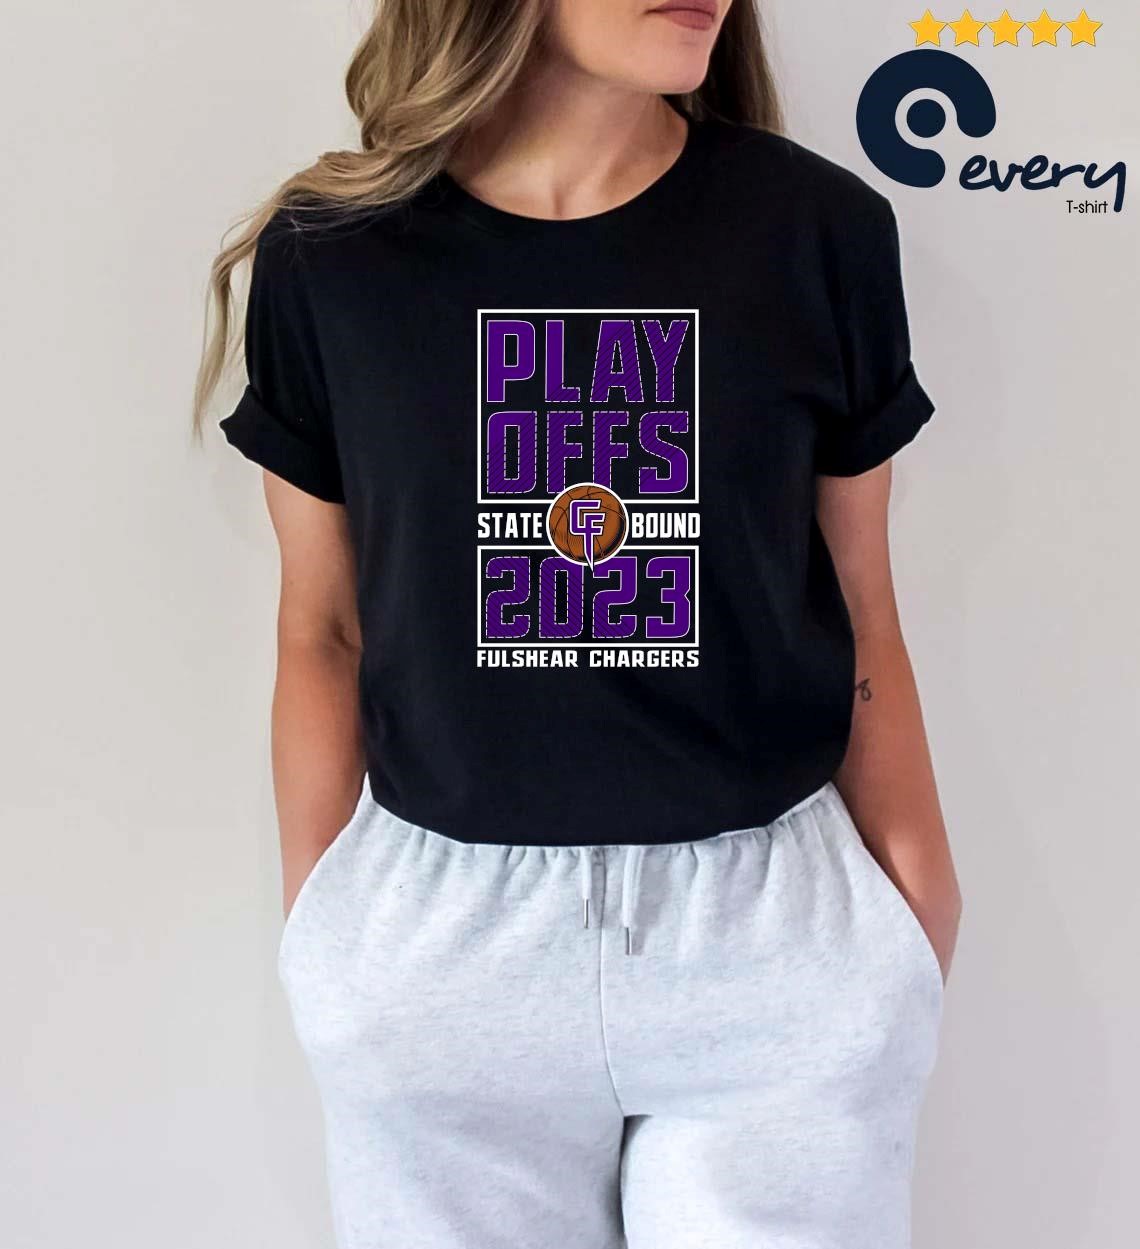 Playoffs 2023 State Bound Fulshear Chargers Shirt